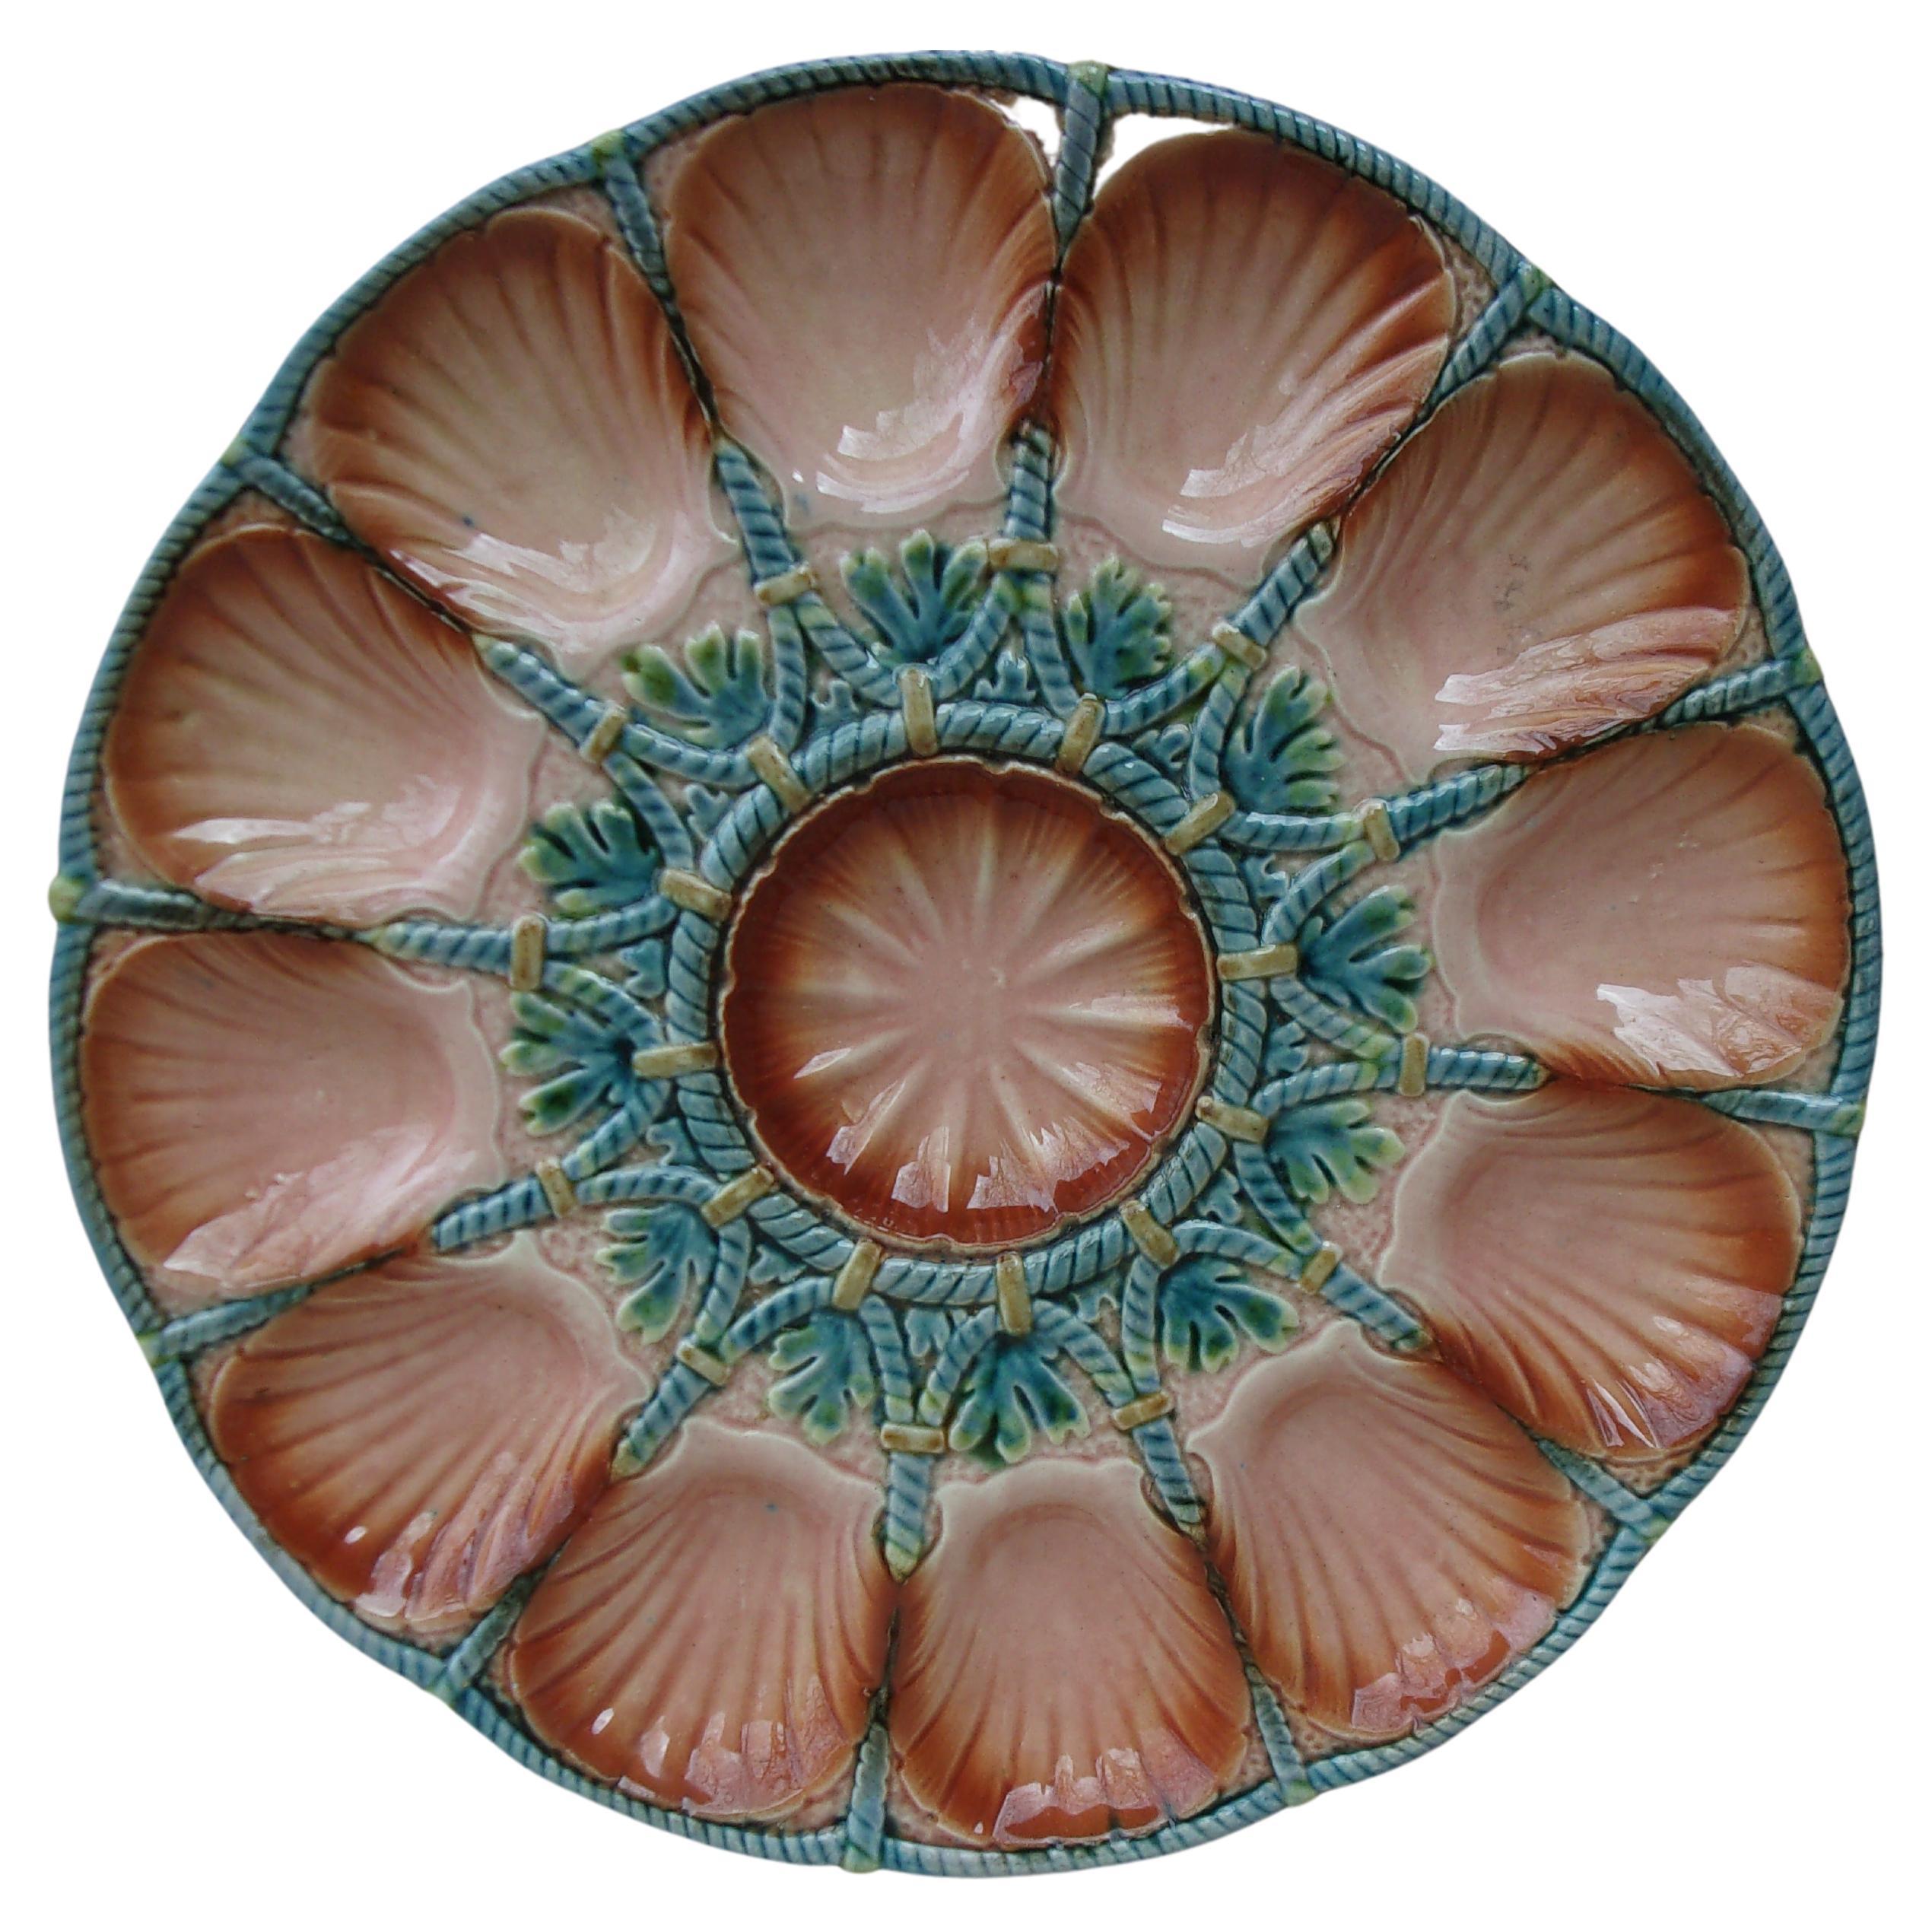 Large French Majolica oyster platter signed Sarreguemines circa 1890.
Diameter / 14.5